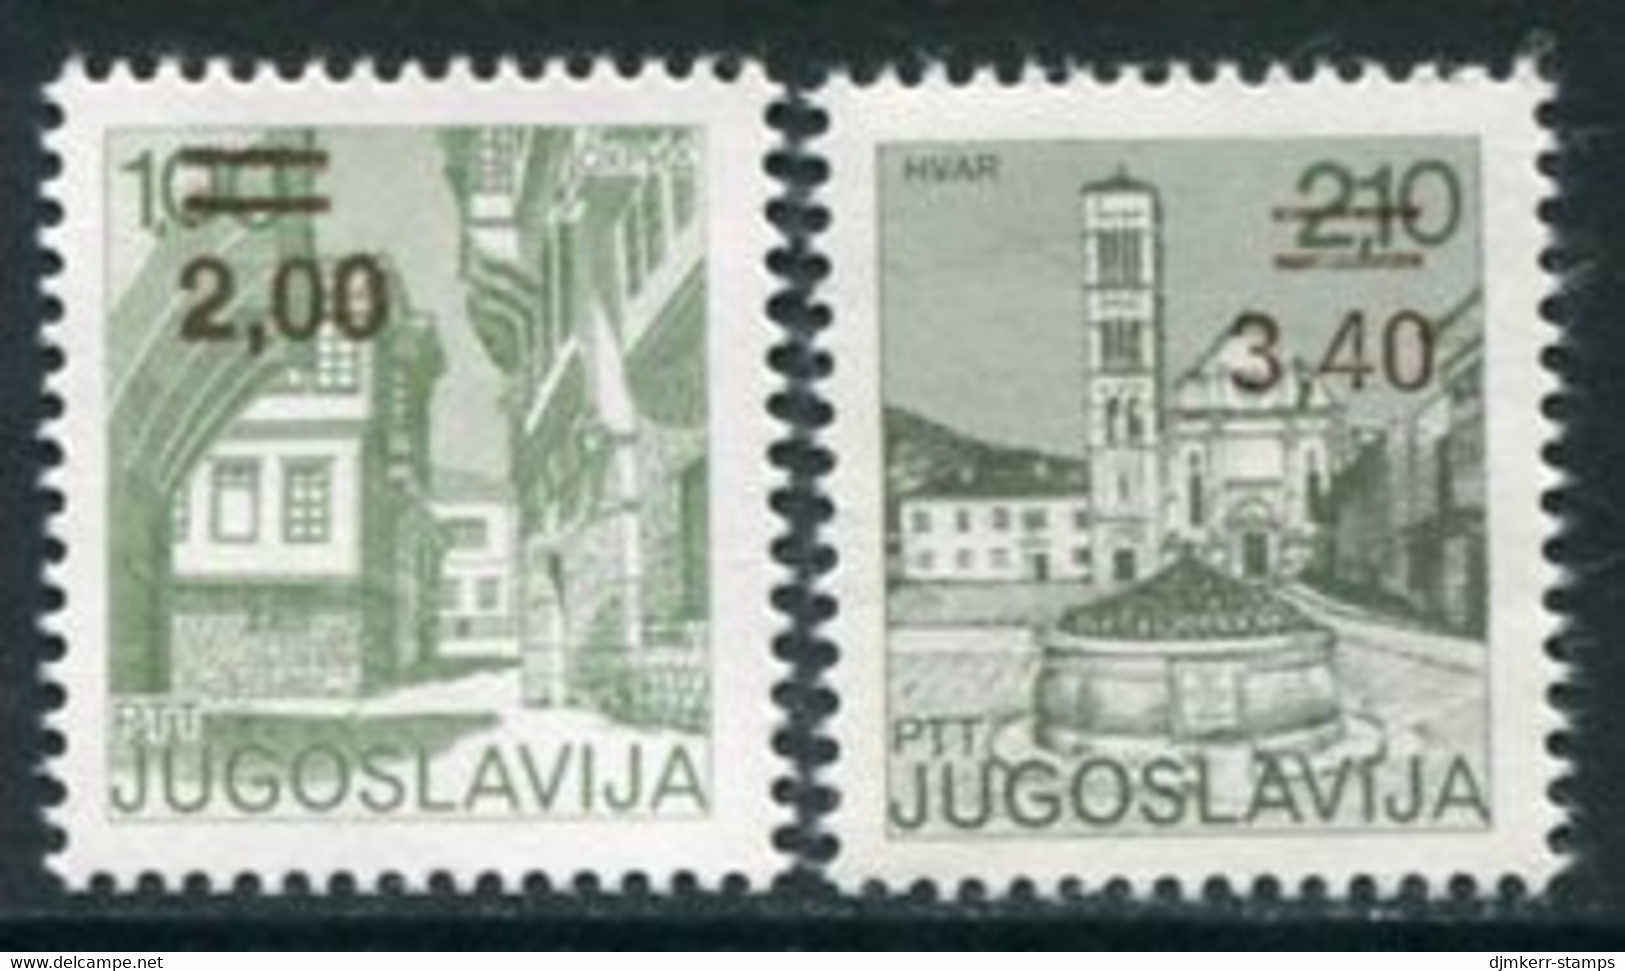 YUGOSLAVIA 1978 Surcharges 2.00 And 3.40 D. MNH / **.  Michel 1736, 1738 - Neufs